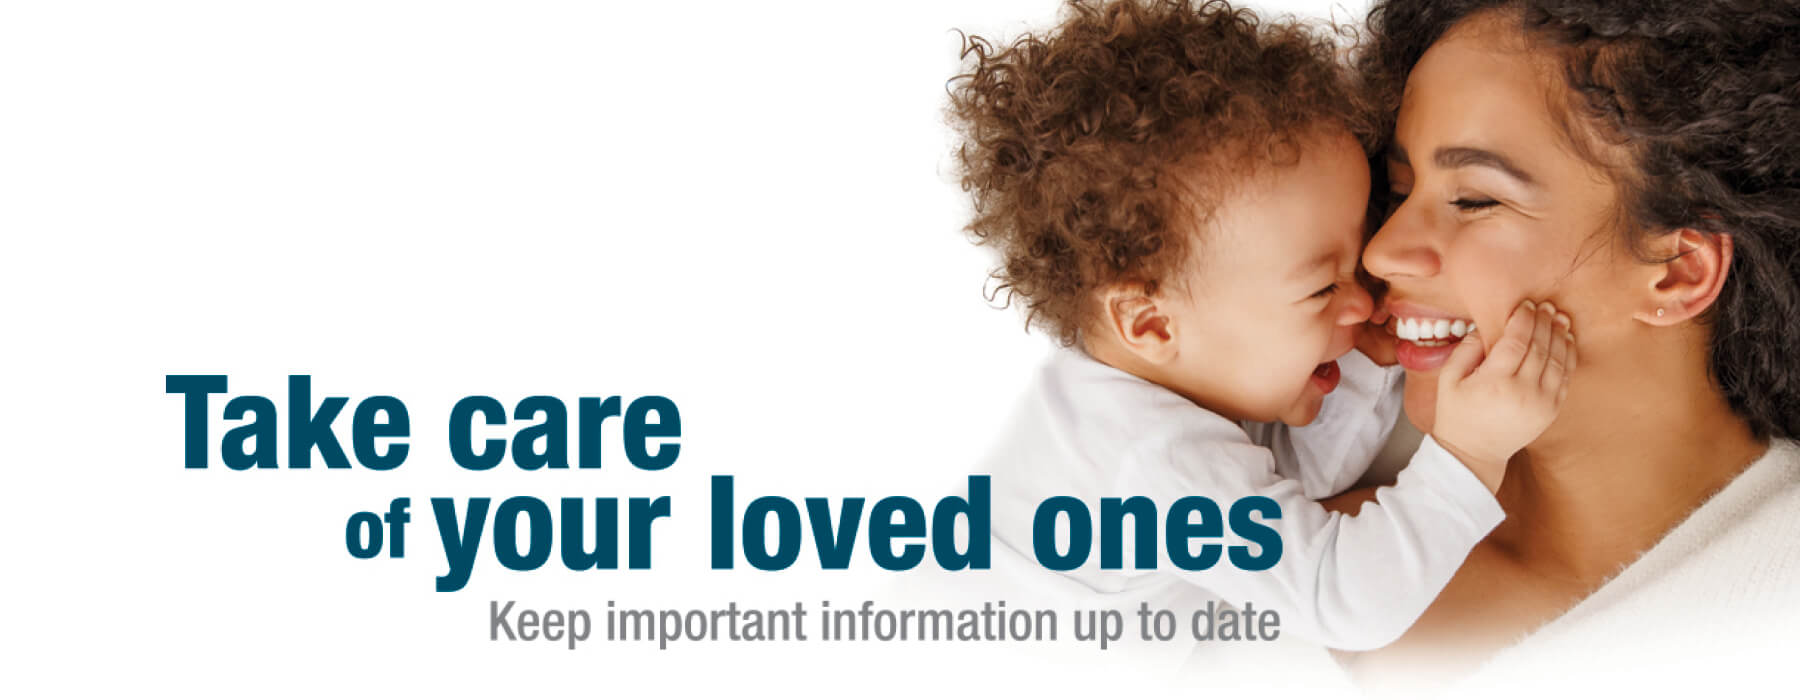 Take care of your loved ones: Keep important information up to date